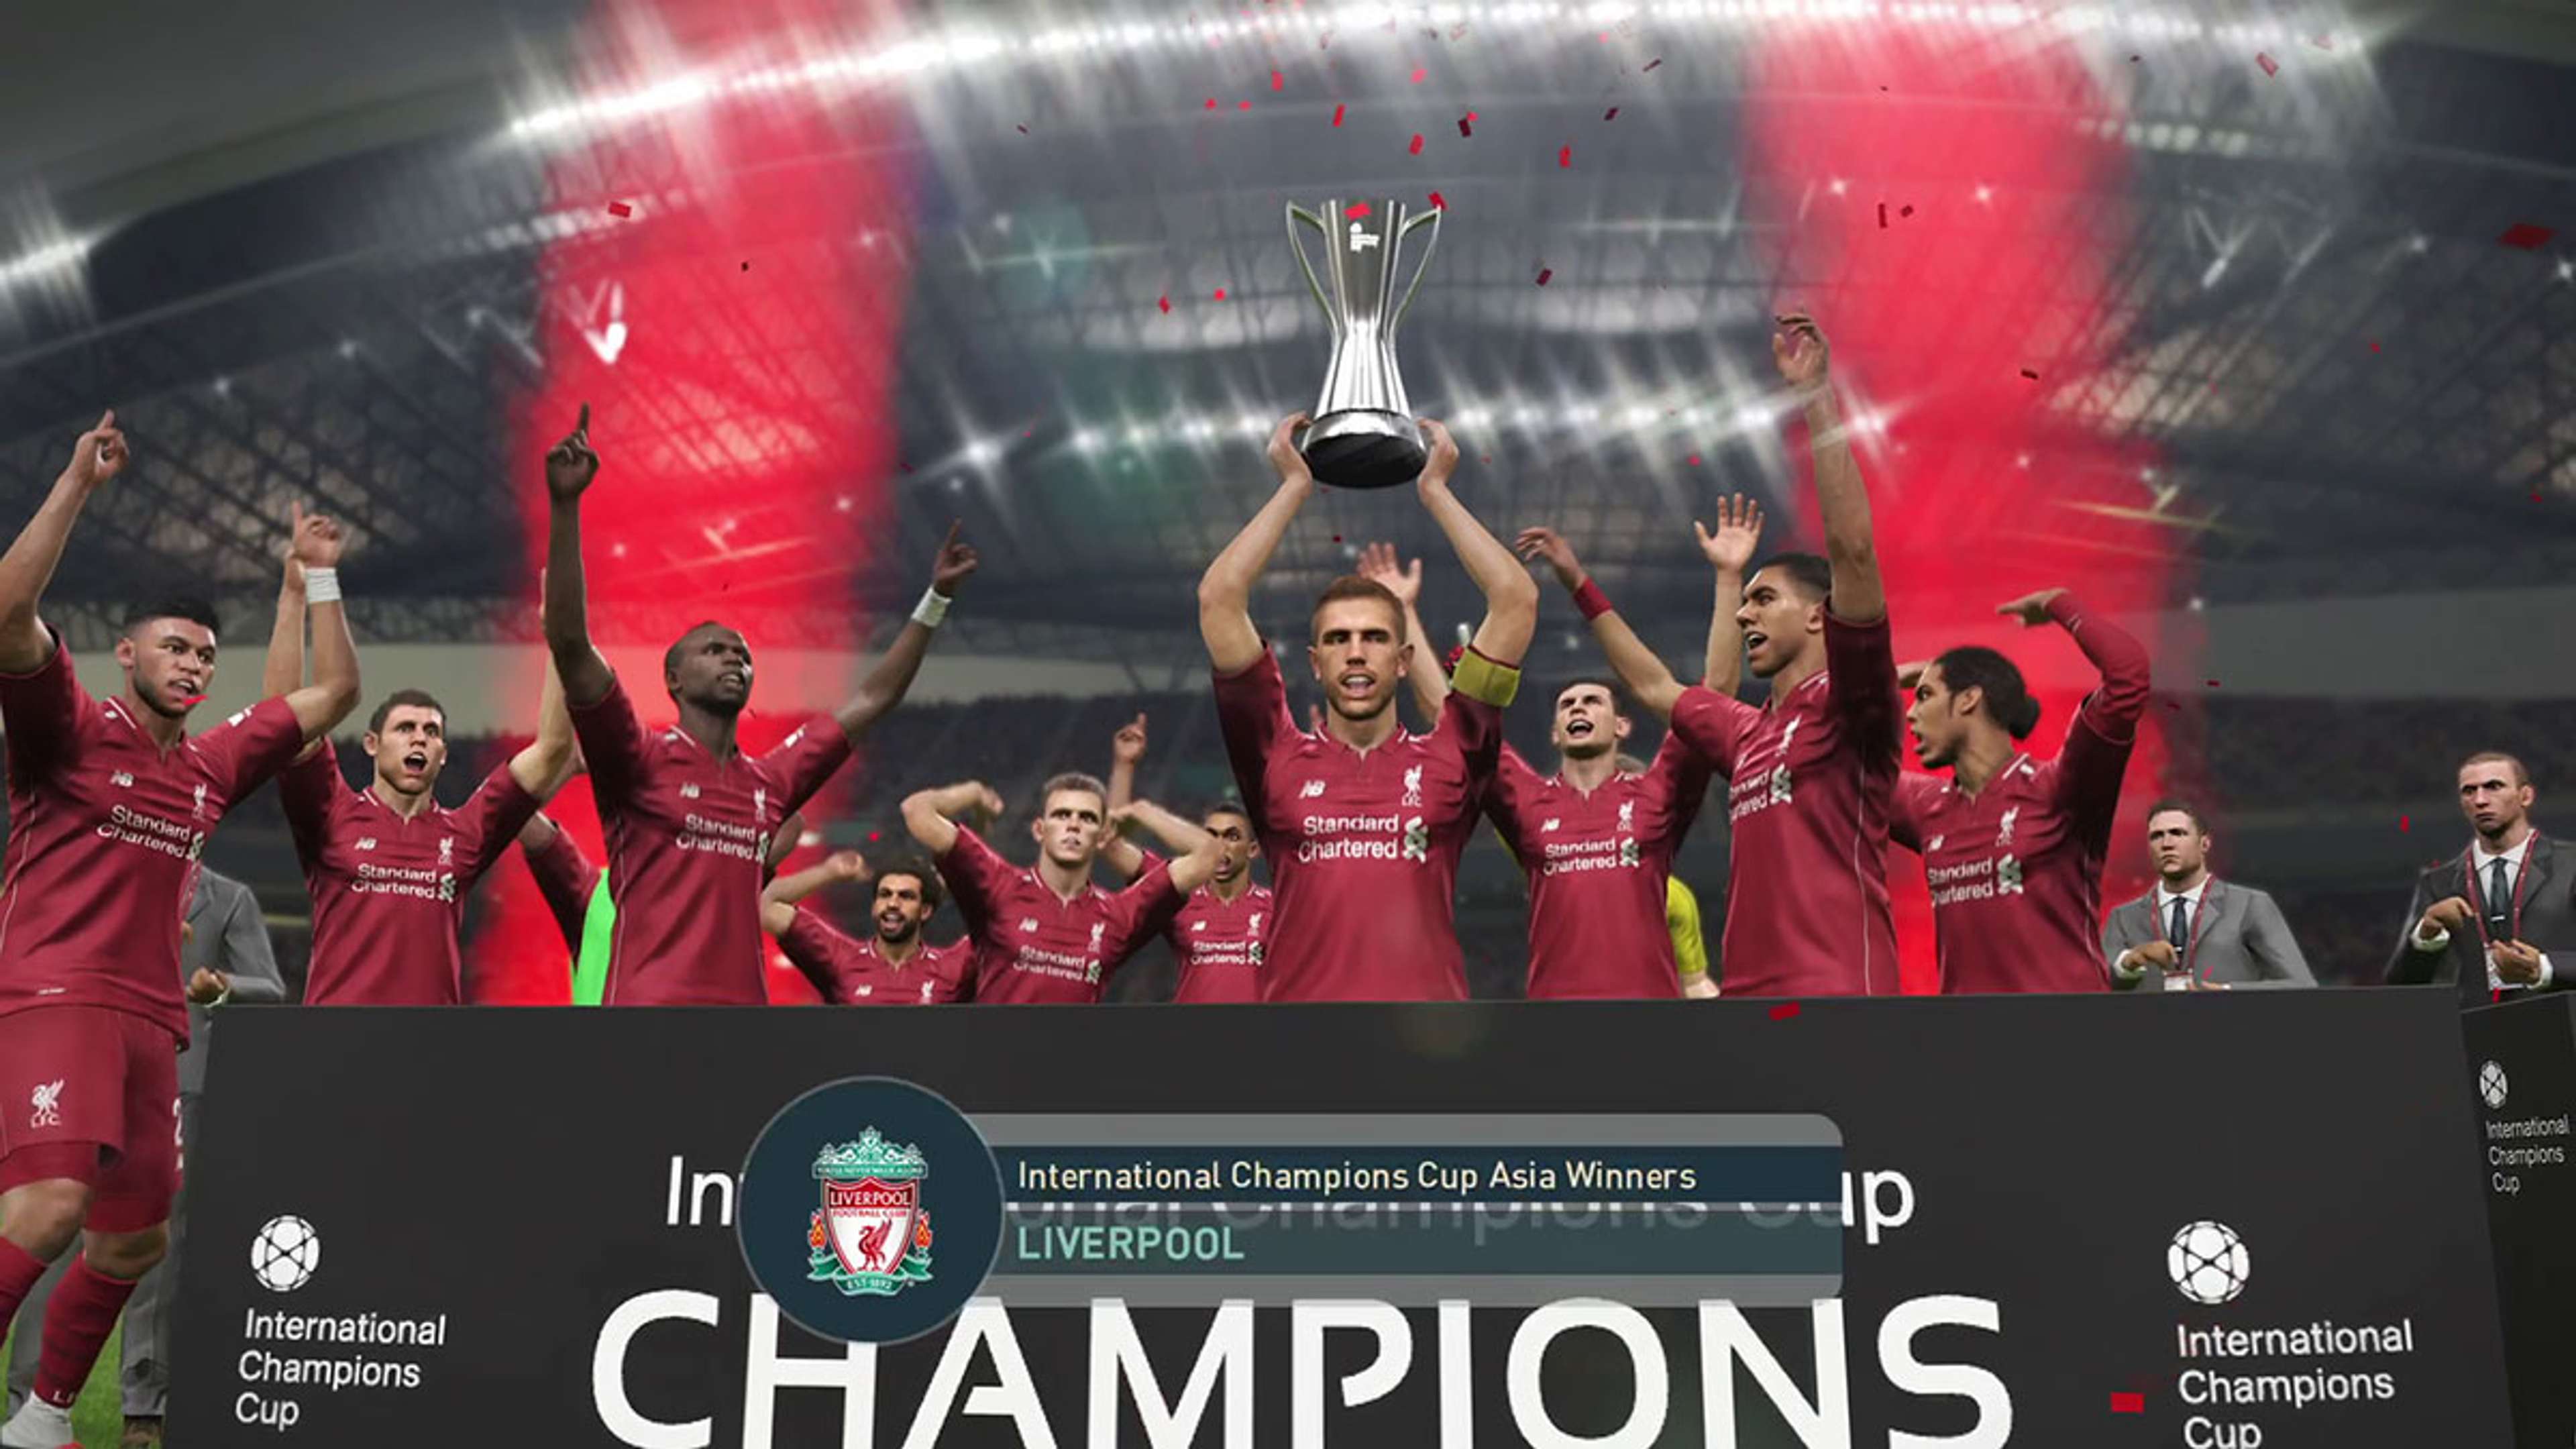 Embed only PES 2019 International Champions Cup